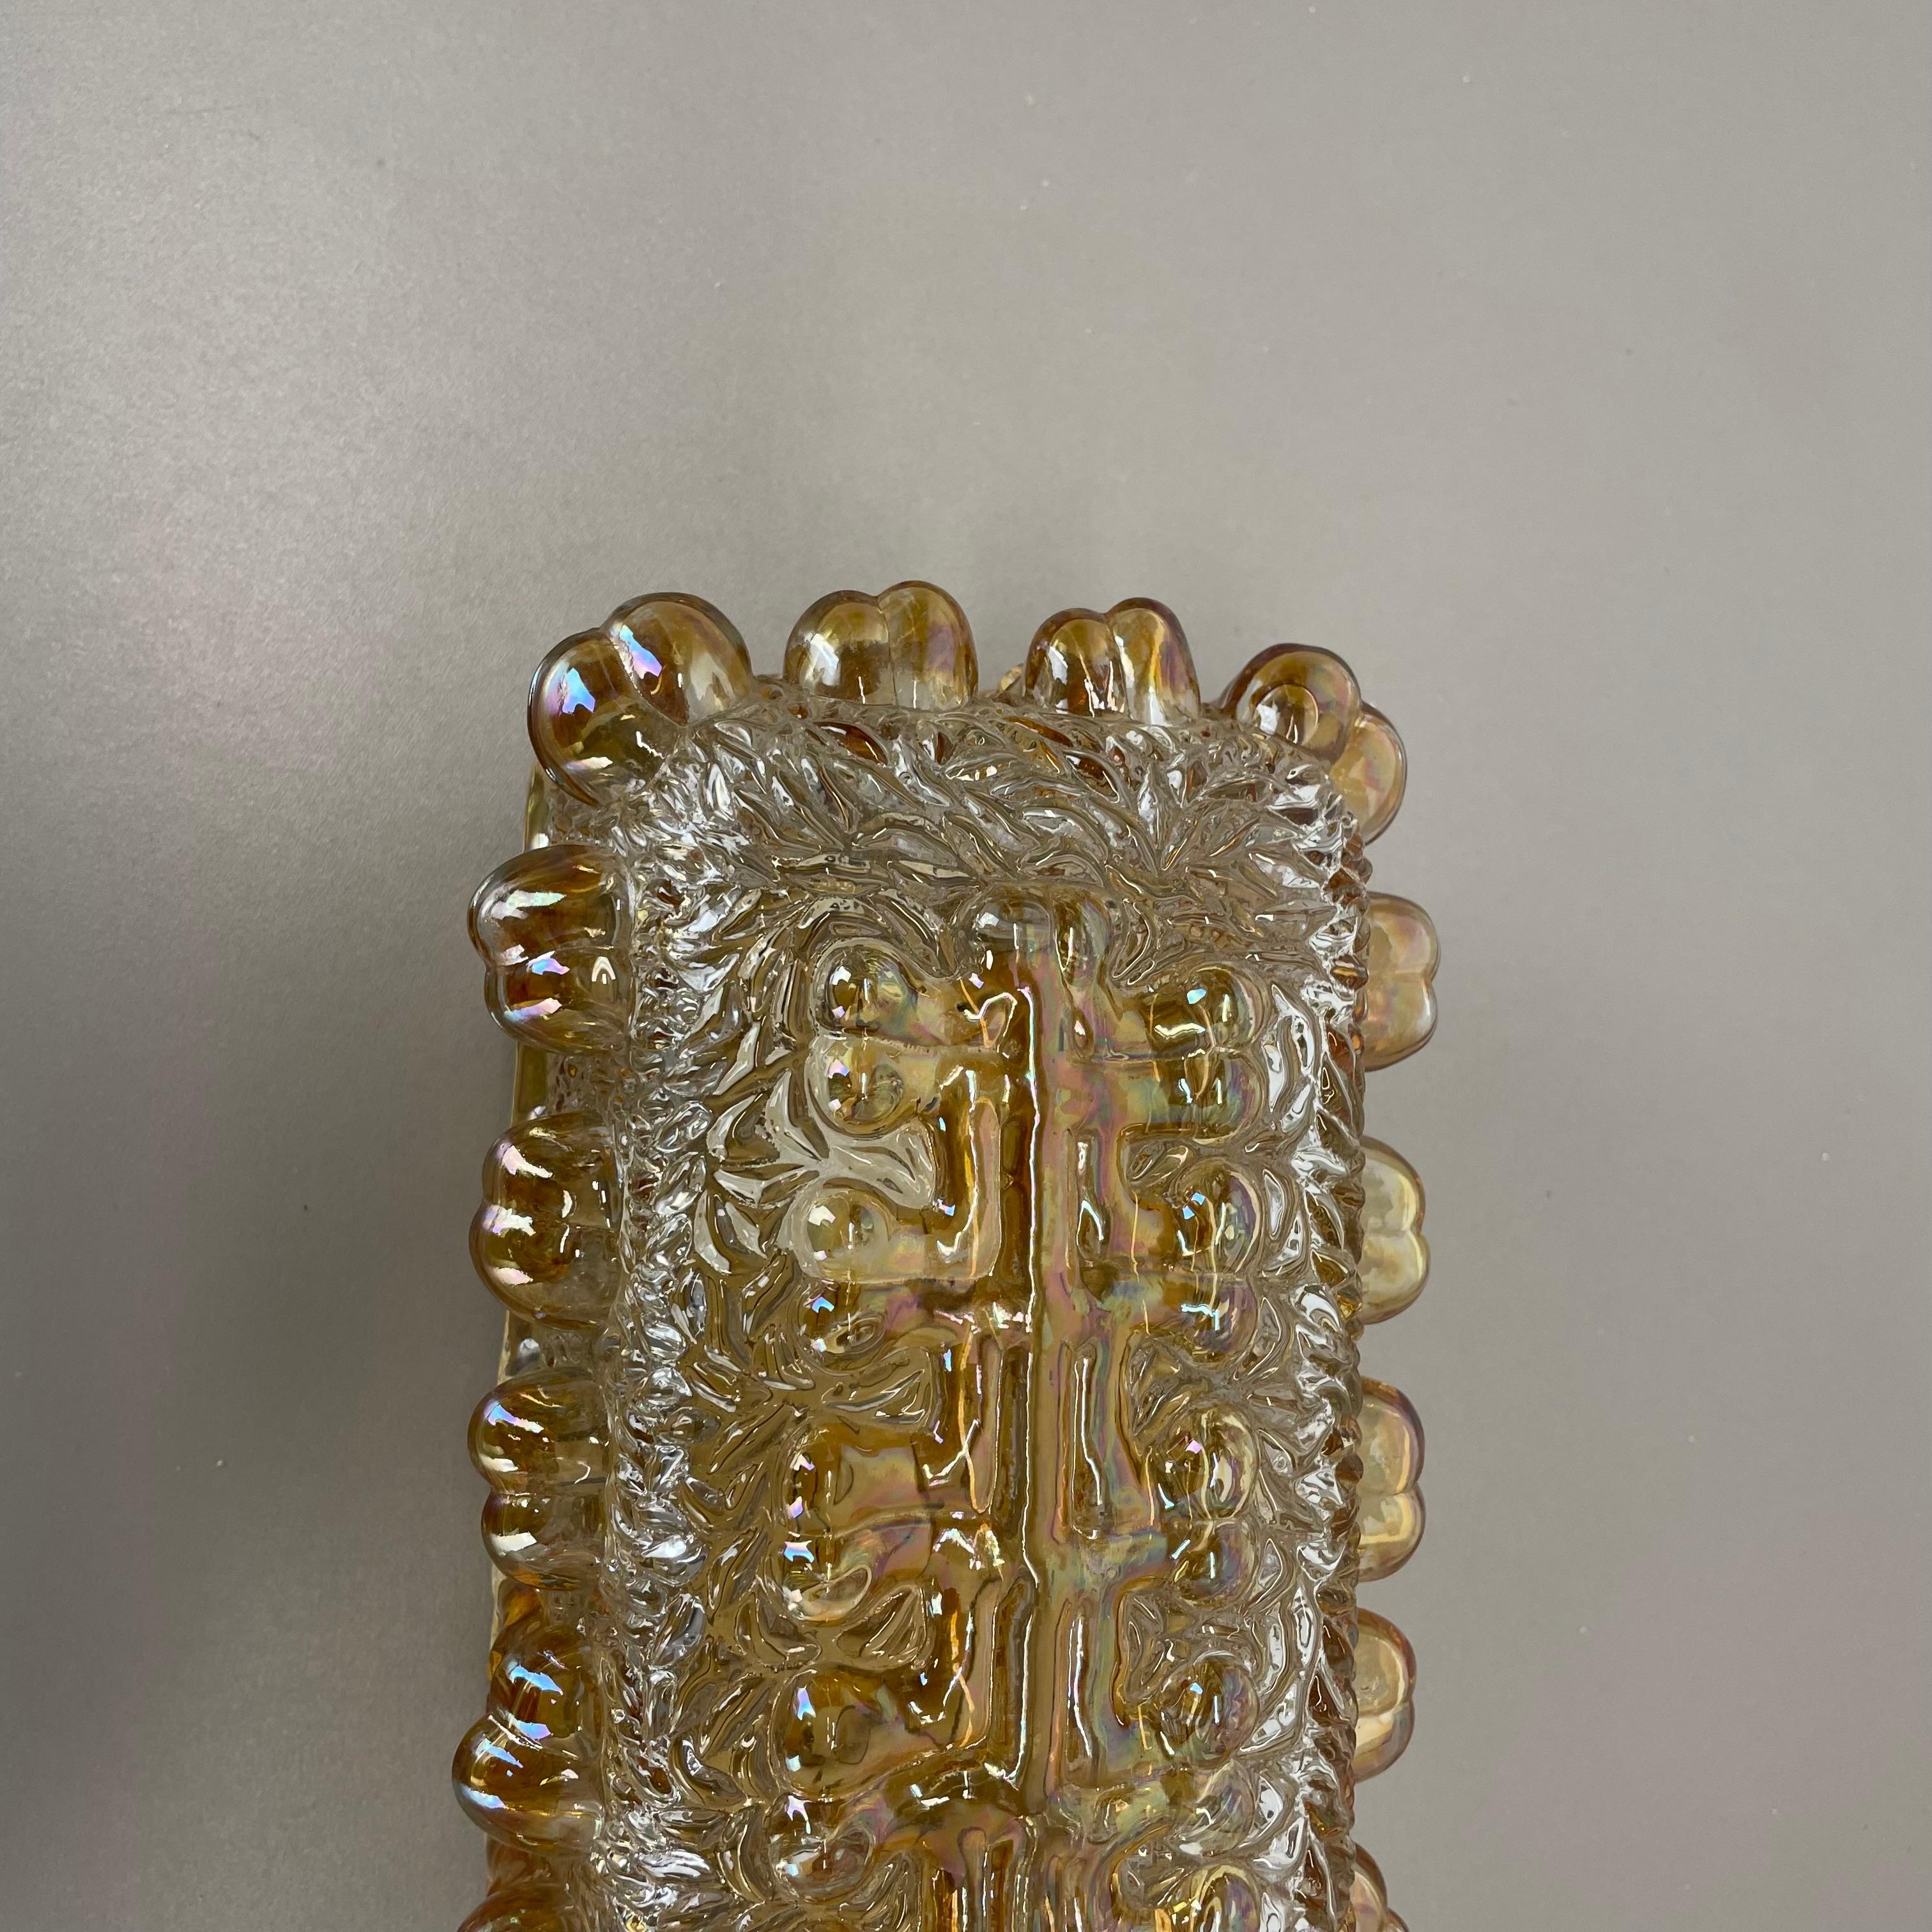 Article:

Wall light sconce


Origin:

Germany



Age:

1970s



This original modernist wall light was produced in Germany in the 1970s. It is made from heavy glass and has a metal wall fixation. The light havs a fantastic abstract and Brutalist